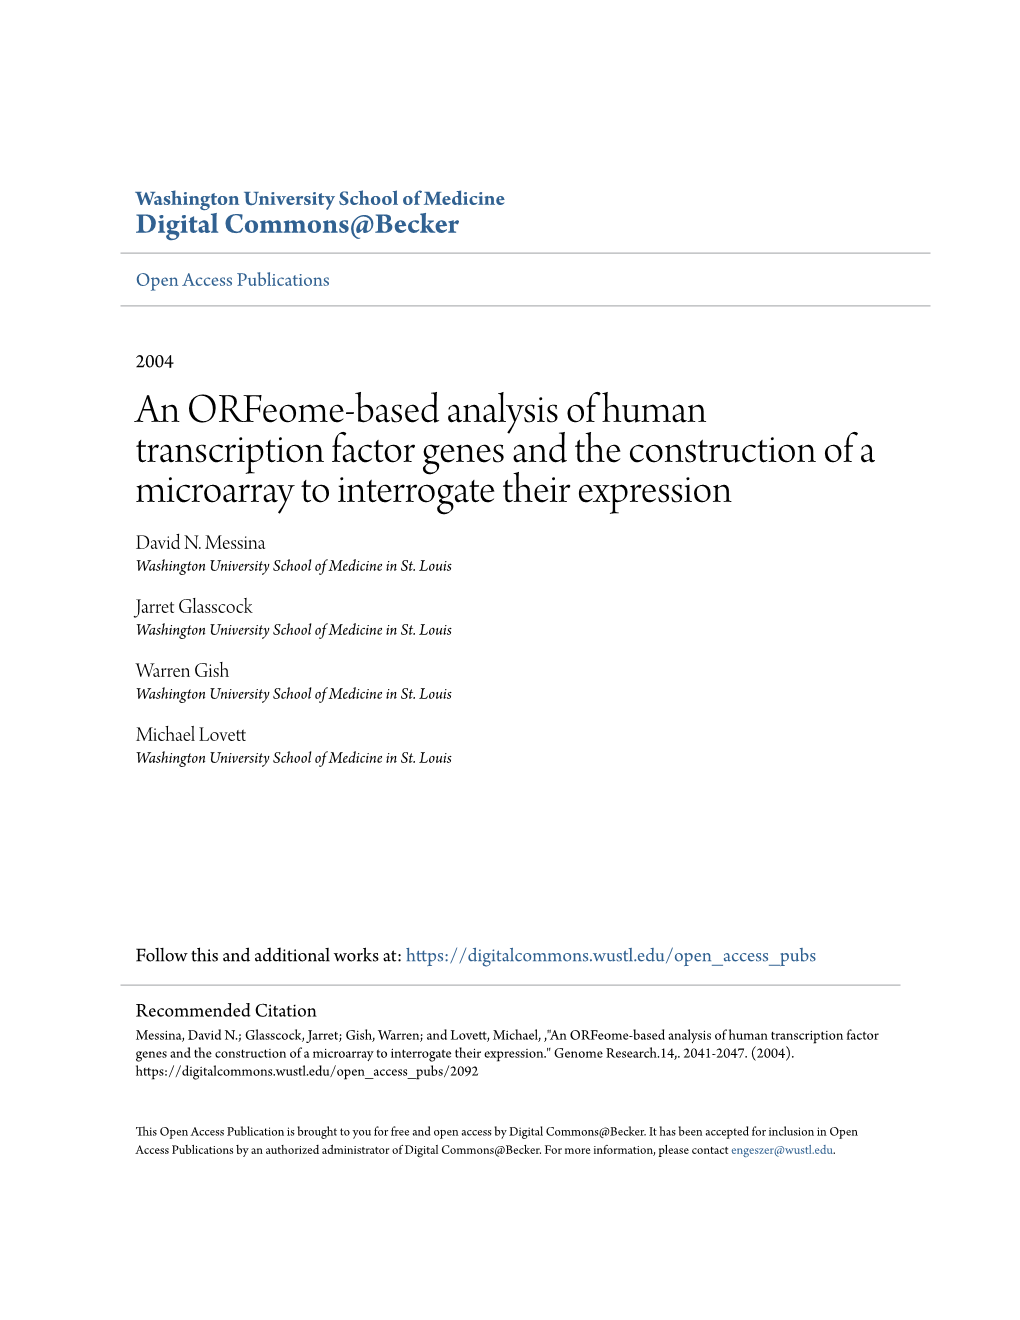 An Orfeome-Based Analysis of Human Transcription Factor Genes and the Construction of a Microarray to Interrogate Their Expression David N